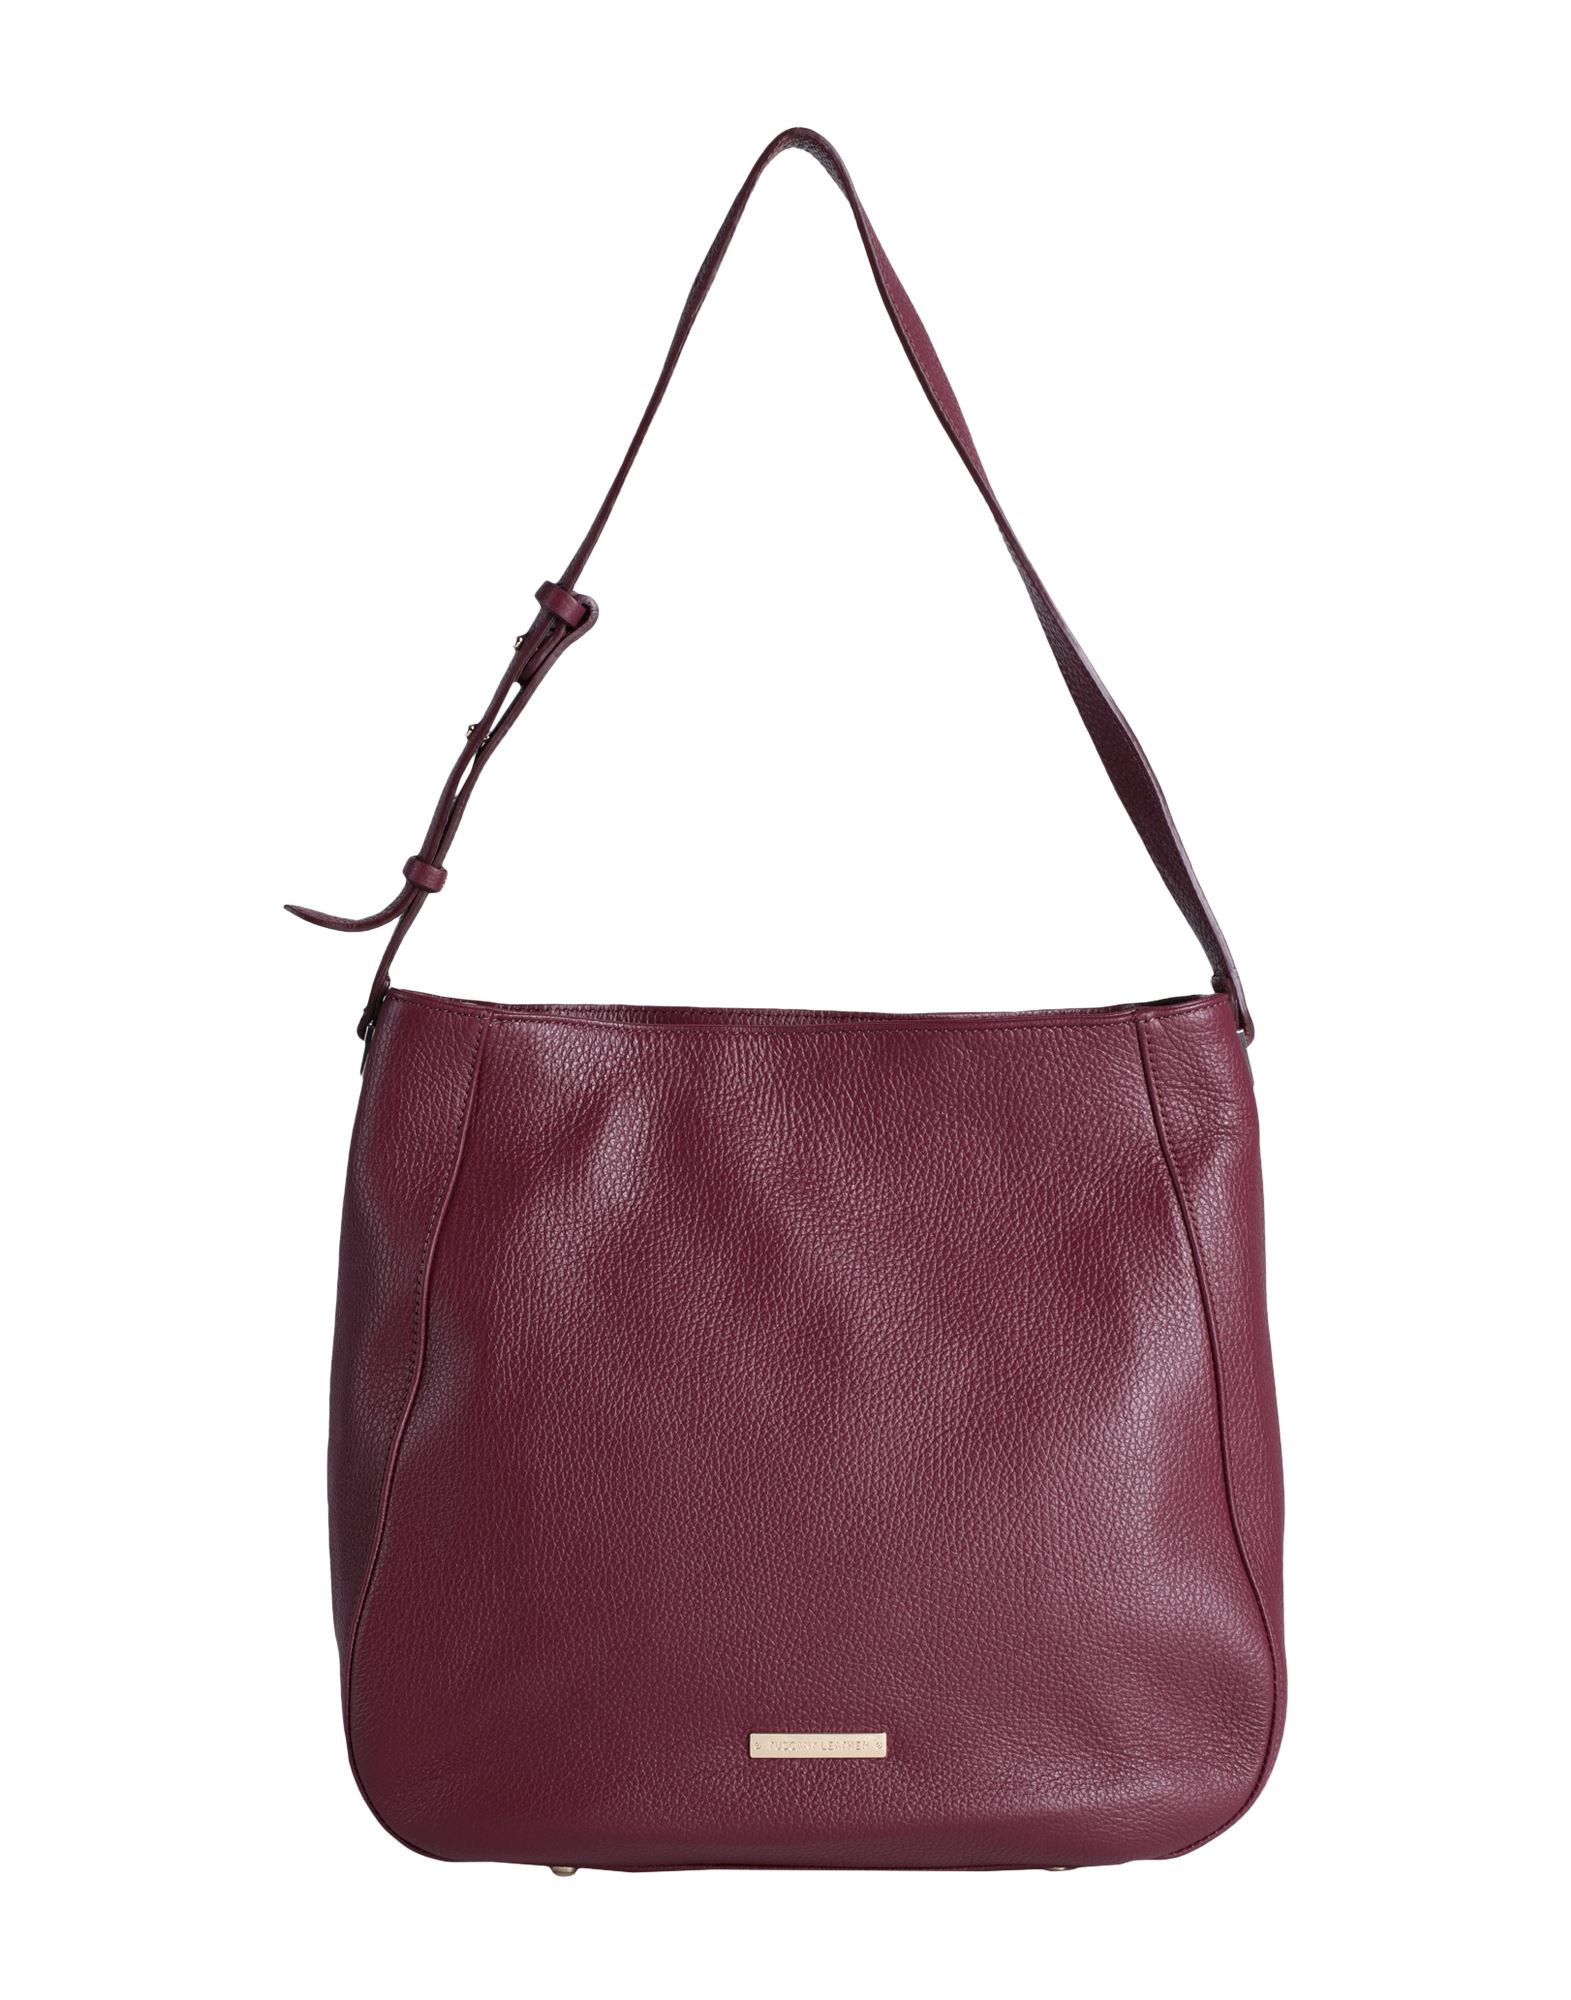 TUSCANY LEATHER Schultertasche Damen Bordeaux von TUSCANY LEATHER